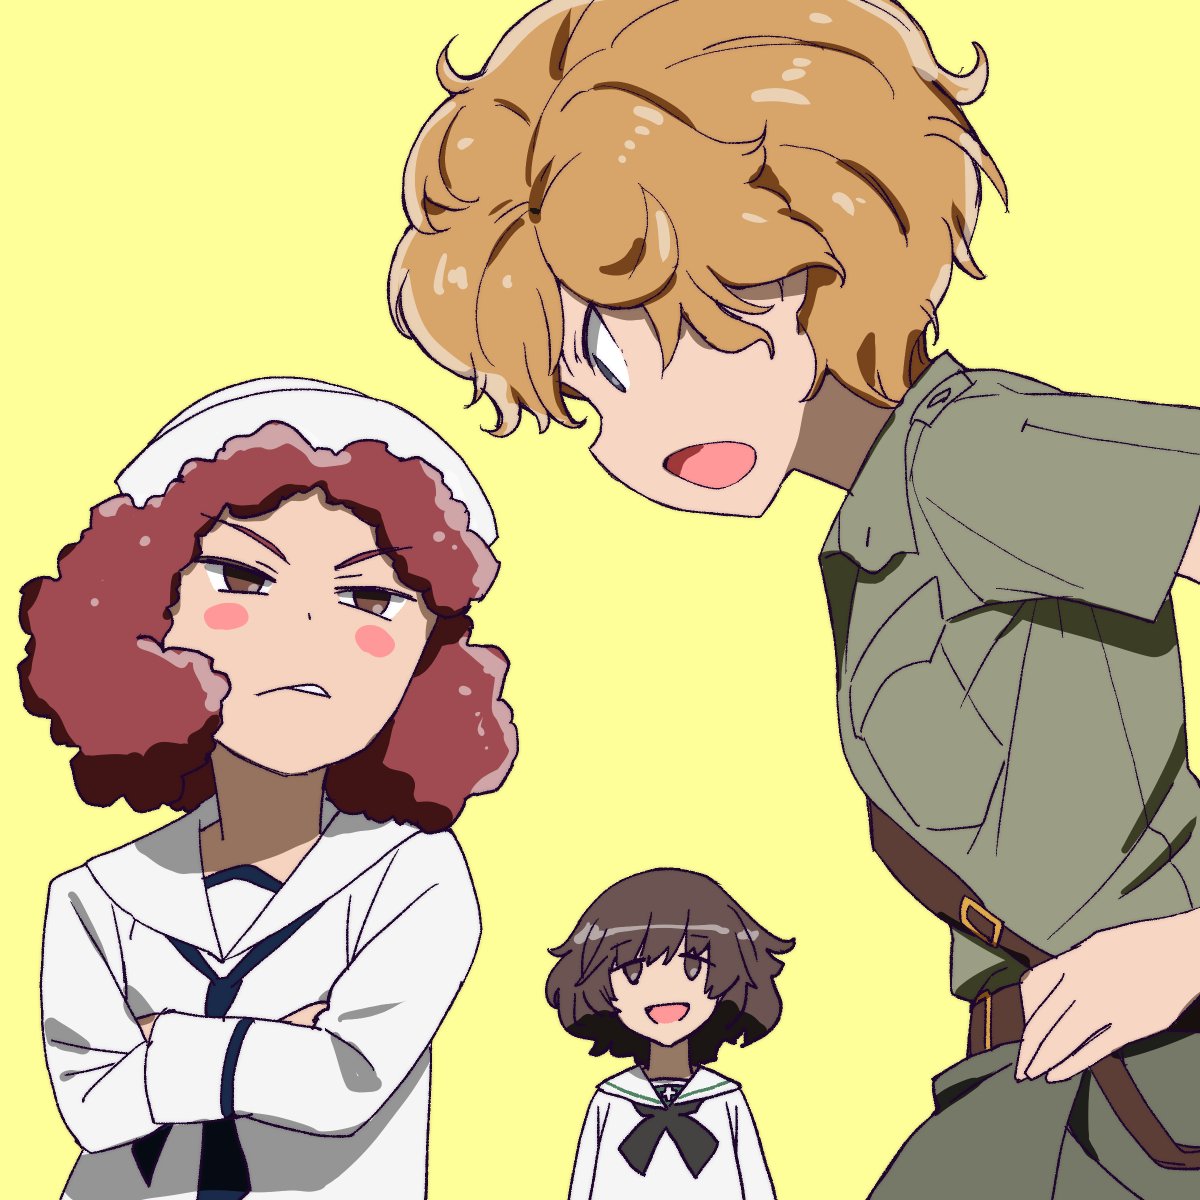 3girls :d akiyama_yukari bangs belt black_neckwear blouse blue_eyes blush_stickers brown_belt brown_eyes brown_hair closed_mouth collared_shirt commentary crossed_arms curly_hair dixie_cup_hat eyebrows_visible_through_hair frown girls_und_panzer glaring green_shirt green_shorts grimace hairstyle_connection half-closed_eyes hat highres kamonohashi_(girls_und_panzer) koala_forest_military_uniform leaning_forward long_sleeves looking_at_viewer messy_hair military_hat multiple_girls navy_blue_neckwear neckerchief onsen_tamago_(hs_egg) ooarai_naval_school_uniform ooarai_school_uniform open_mouth orange_hair red_eyes redhead rum_(girls_und_panzer) sailor sailor_collar sam_browne_belt school_uniform serafuku shirt short_hair short_sleeves shorts simple_background smile standing v-shaped_eyebrows white_blouse white_headwear yellow_background